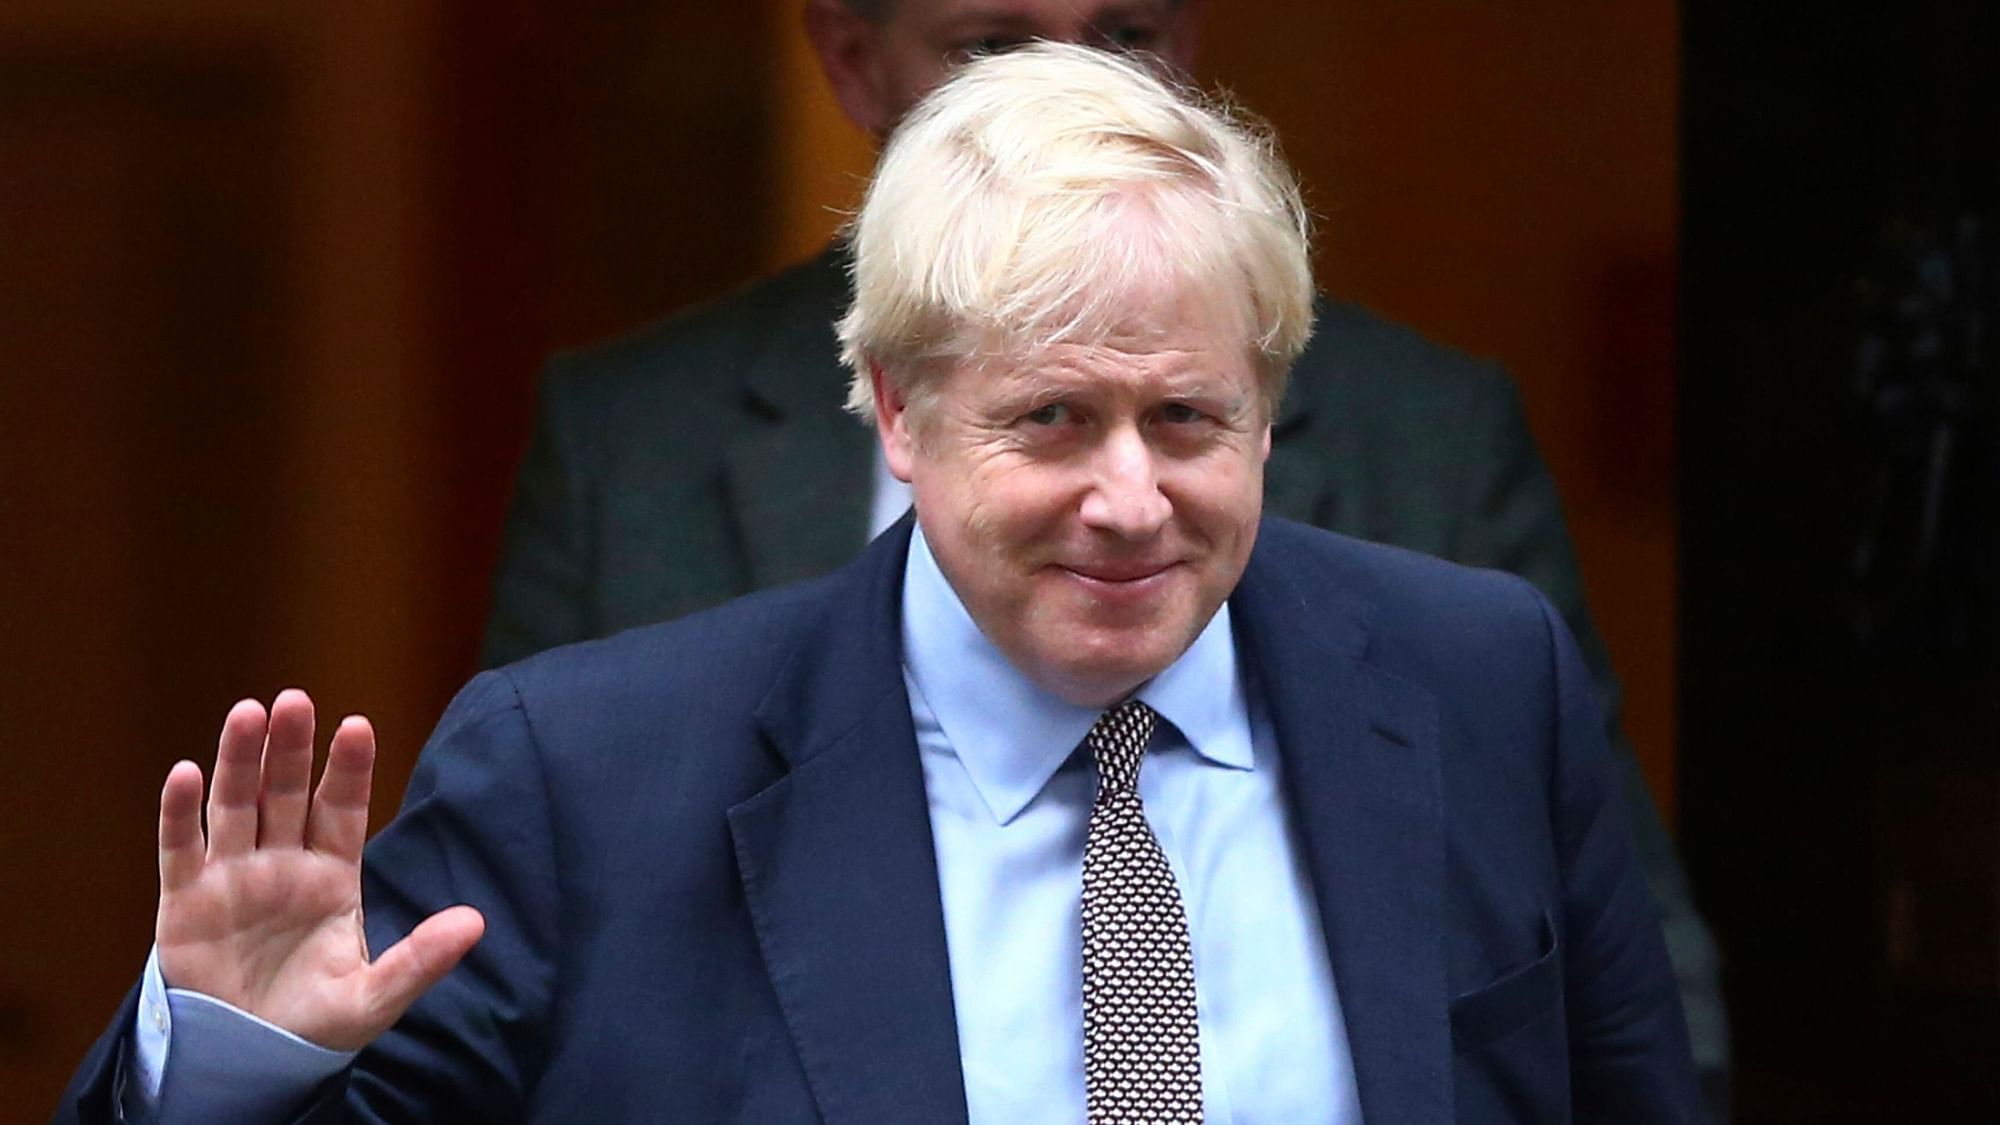 <div class="paragraphs"><p>British Prime Minister Boris Johnson has confirmed that he will not introduce any further COVID-19 restrictions in the UK before Christmas, but has warned that the situation remains "finely balanced" ahead of the new year.</p></div>